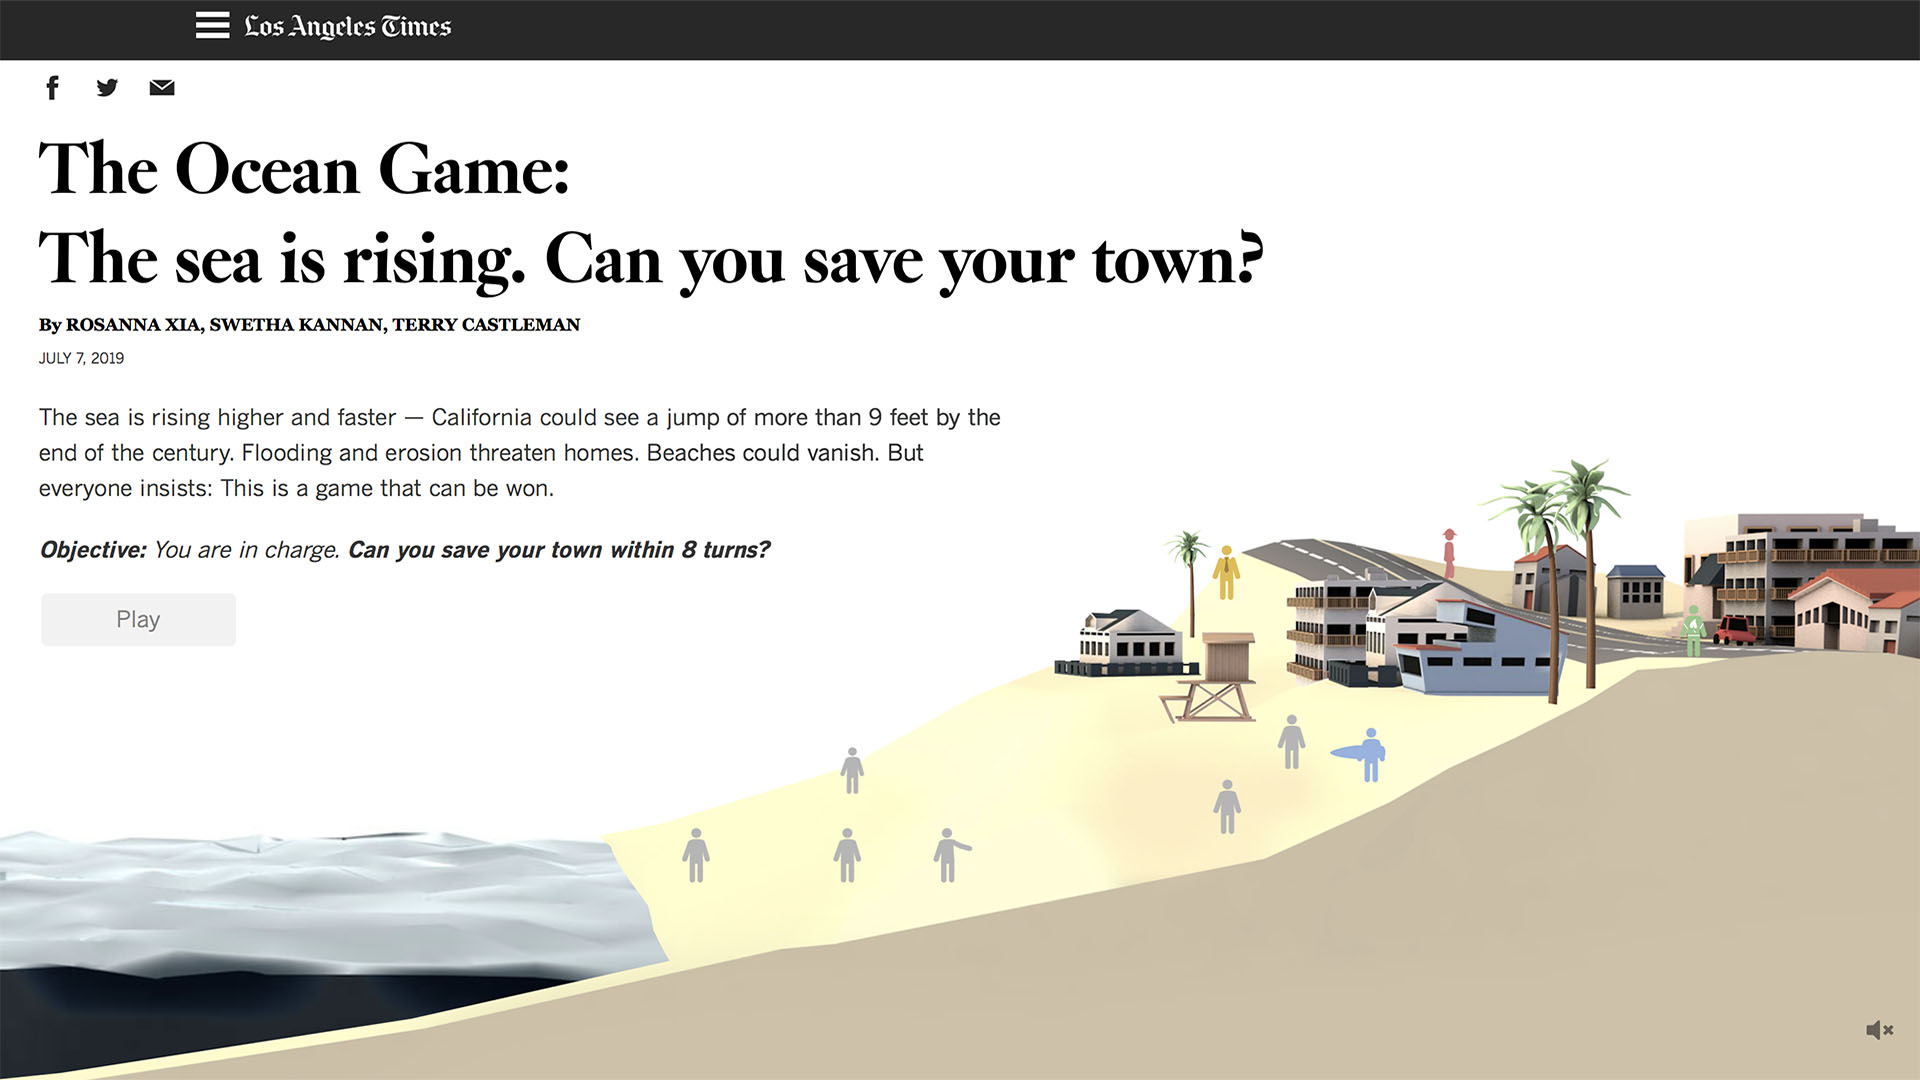 view of the initial desktop screen of the webpage